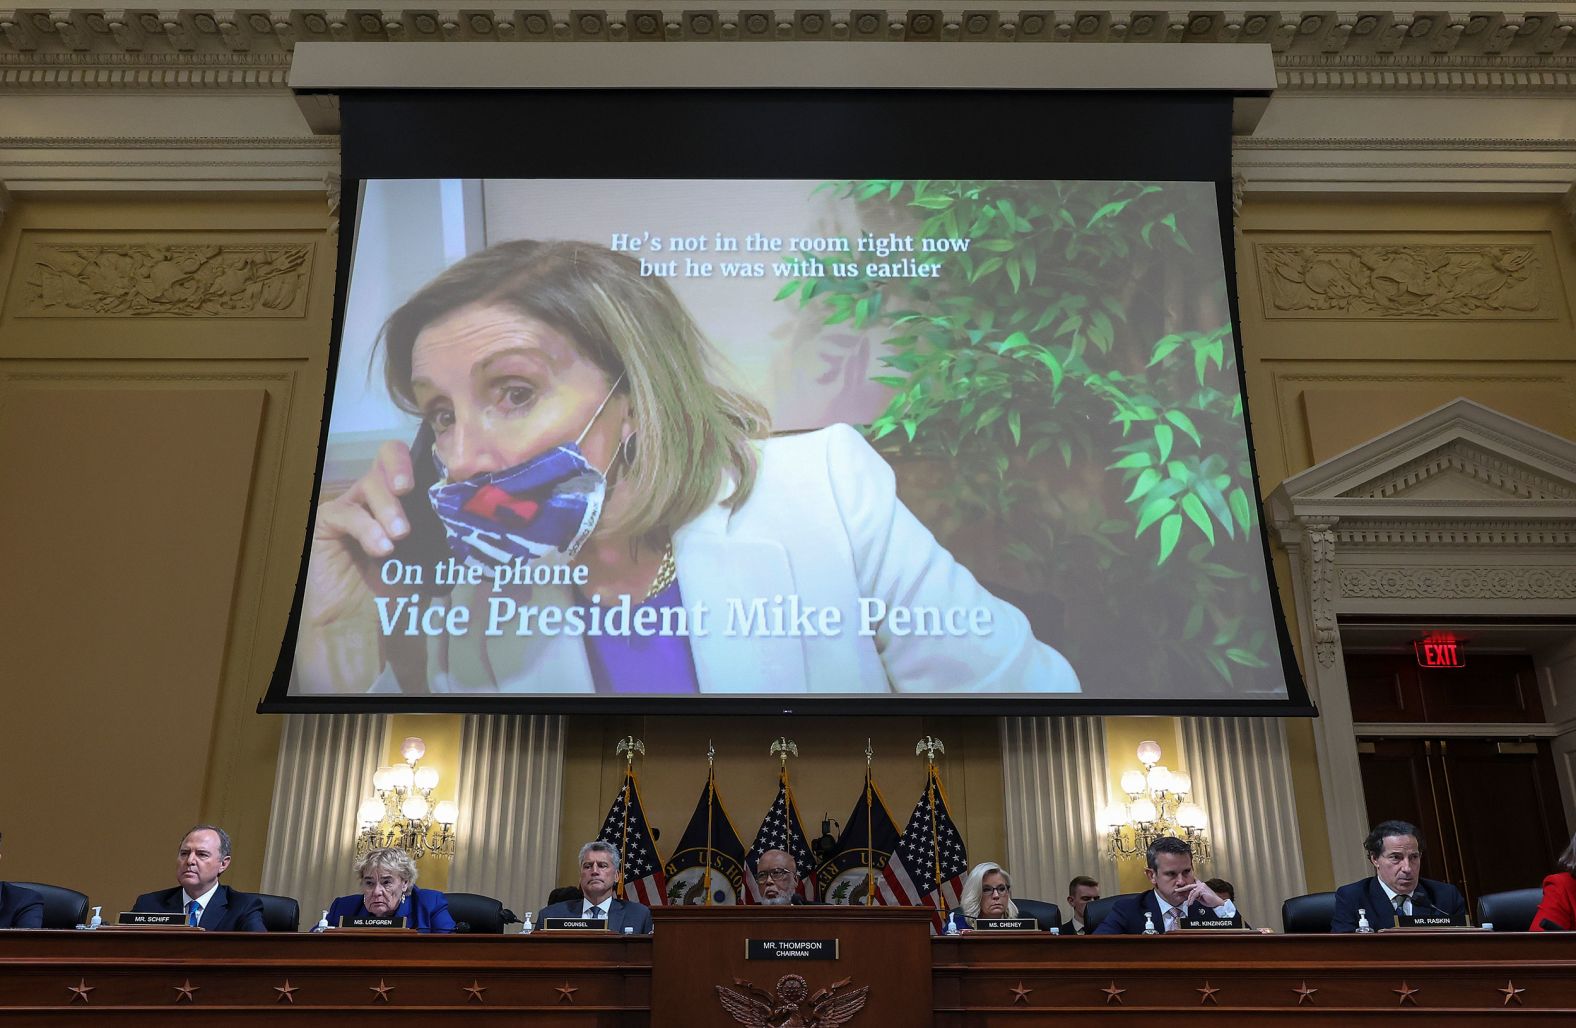 A video of House Speaker Nancy Pelosi is played during the hearing on October 13. The committee aired <a href="index.php?page=&url=https%3A%2F%2Fwww.cnn.com%2Fpolitics%2Flive-news%2Fjan-6-hearing-livestream-10-13-2022%23h_f9536f8593b3ec4a84653366d50fdf77" target="_blank">previously unseen footage from Fort McNair,</a> the DC-area Army base where congressional leaders took refuge during the insurrection and scrambled to respond to the unfolding crisis.